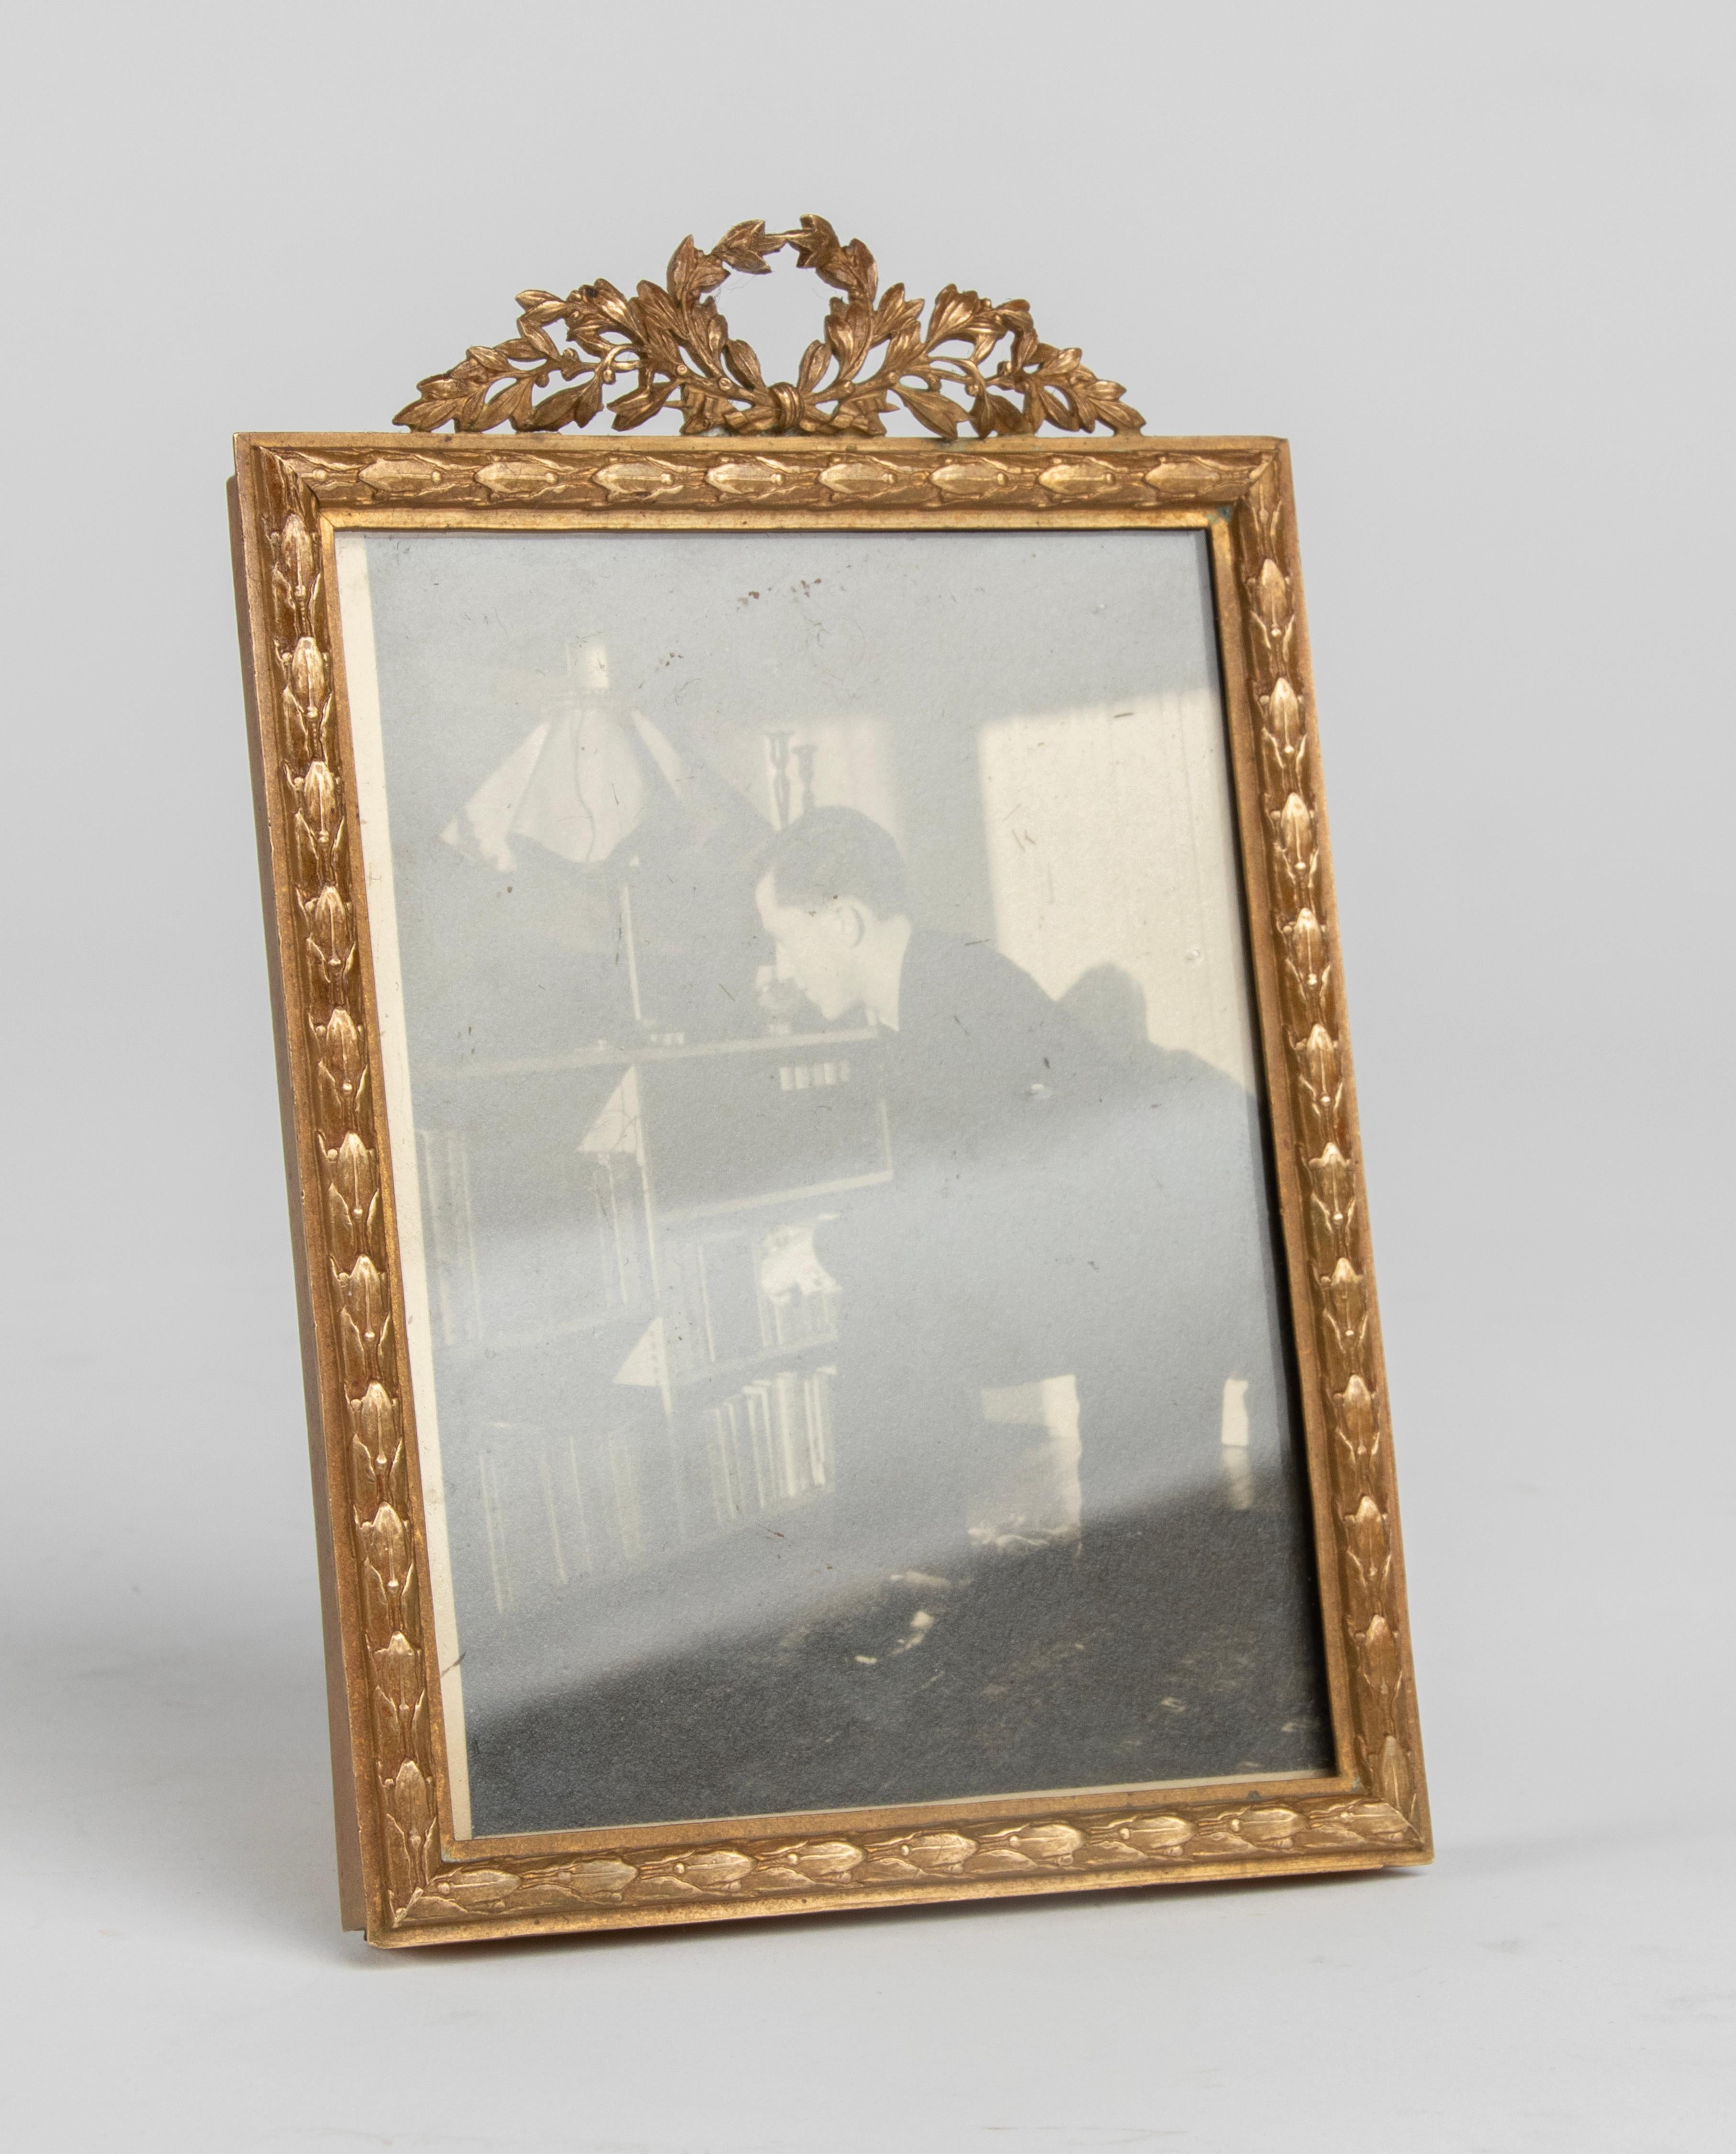 A refined antique photo frame, made of bronze, in Louis XVI style. On top a crest of laurel wreath. The trim is decorated with laurel leaves. Made in France circa 1880-1890. For on the wall or on a table.

Dimensions: 15 (h) x 10 x 7 cm 
Dimensions